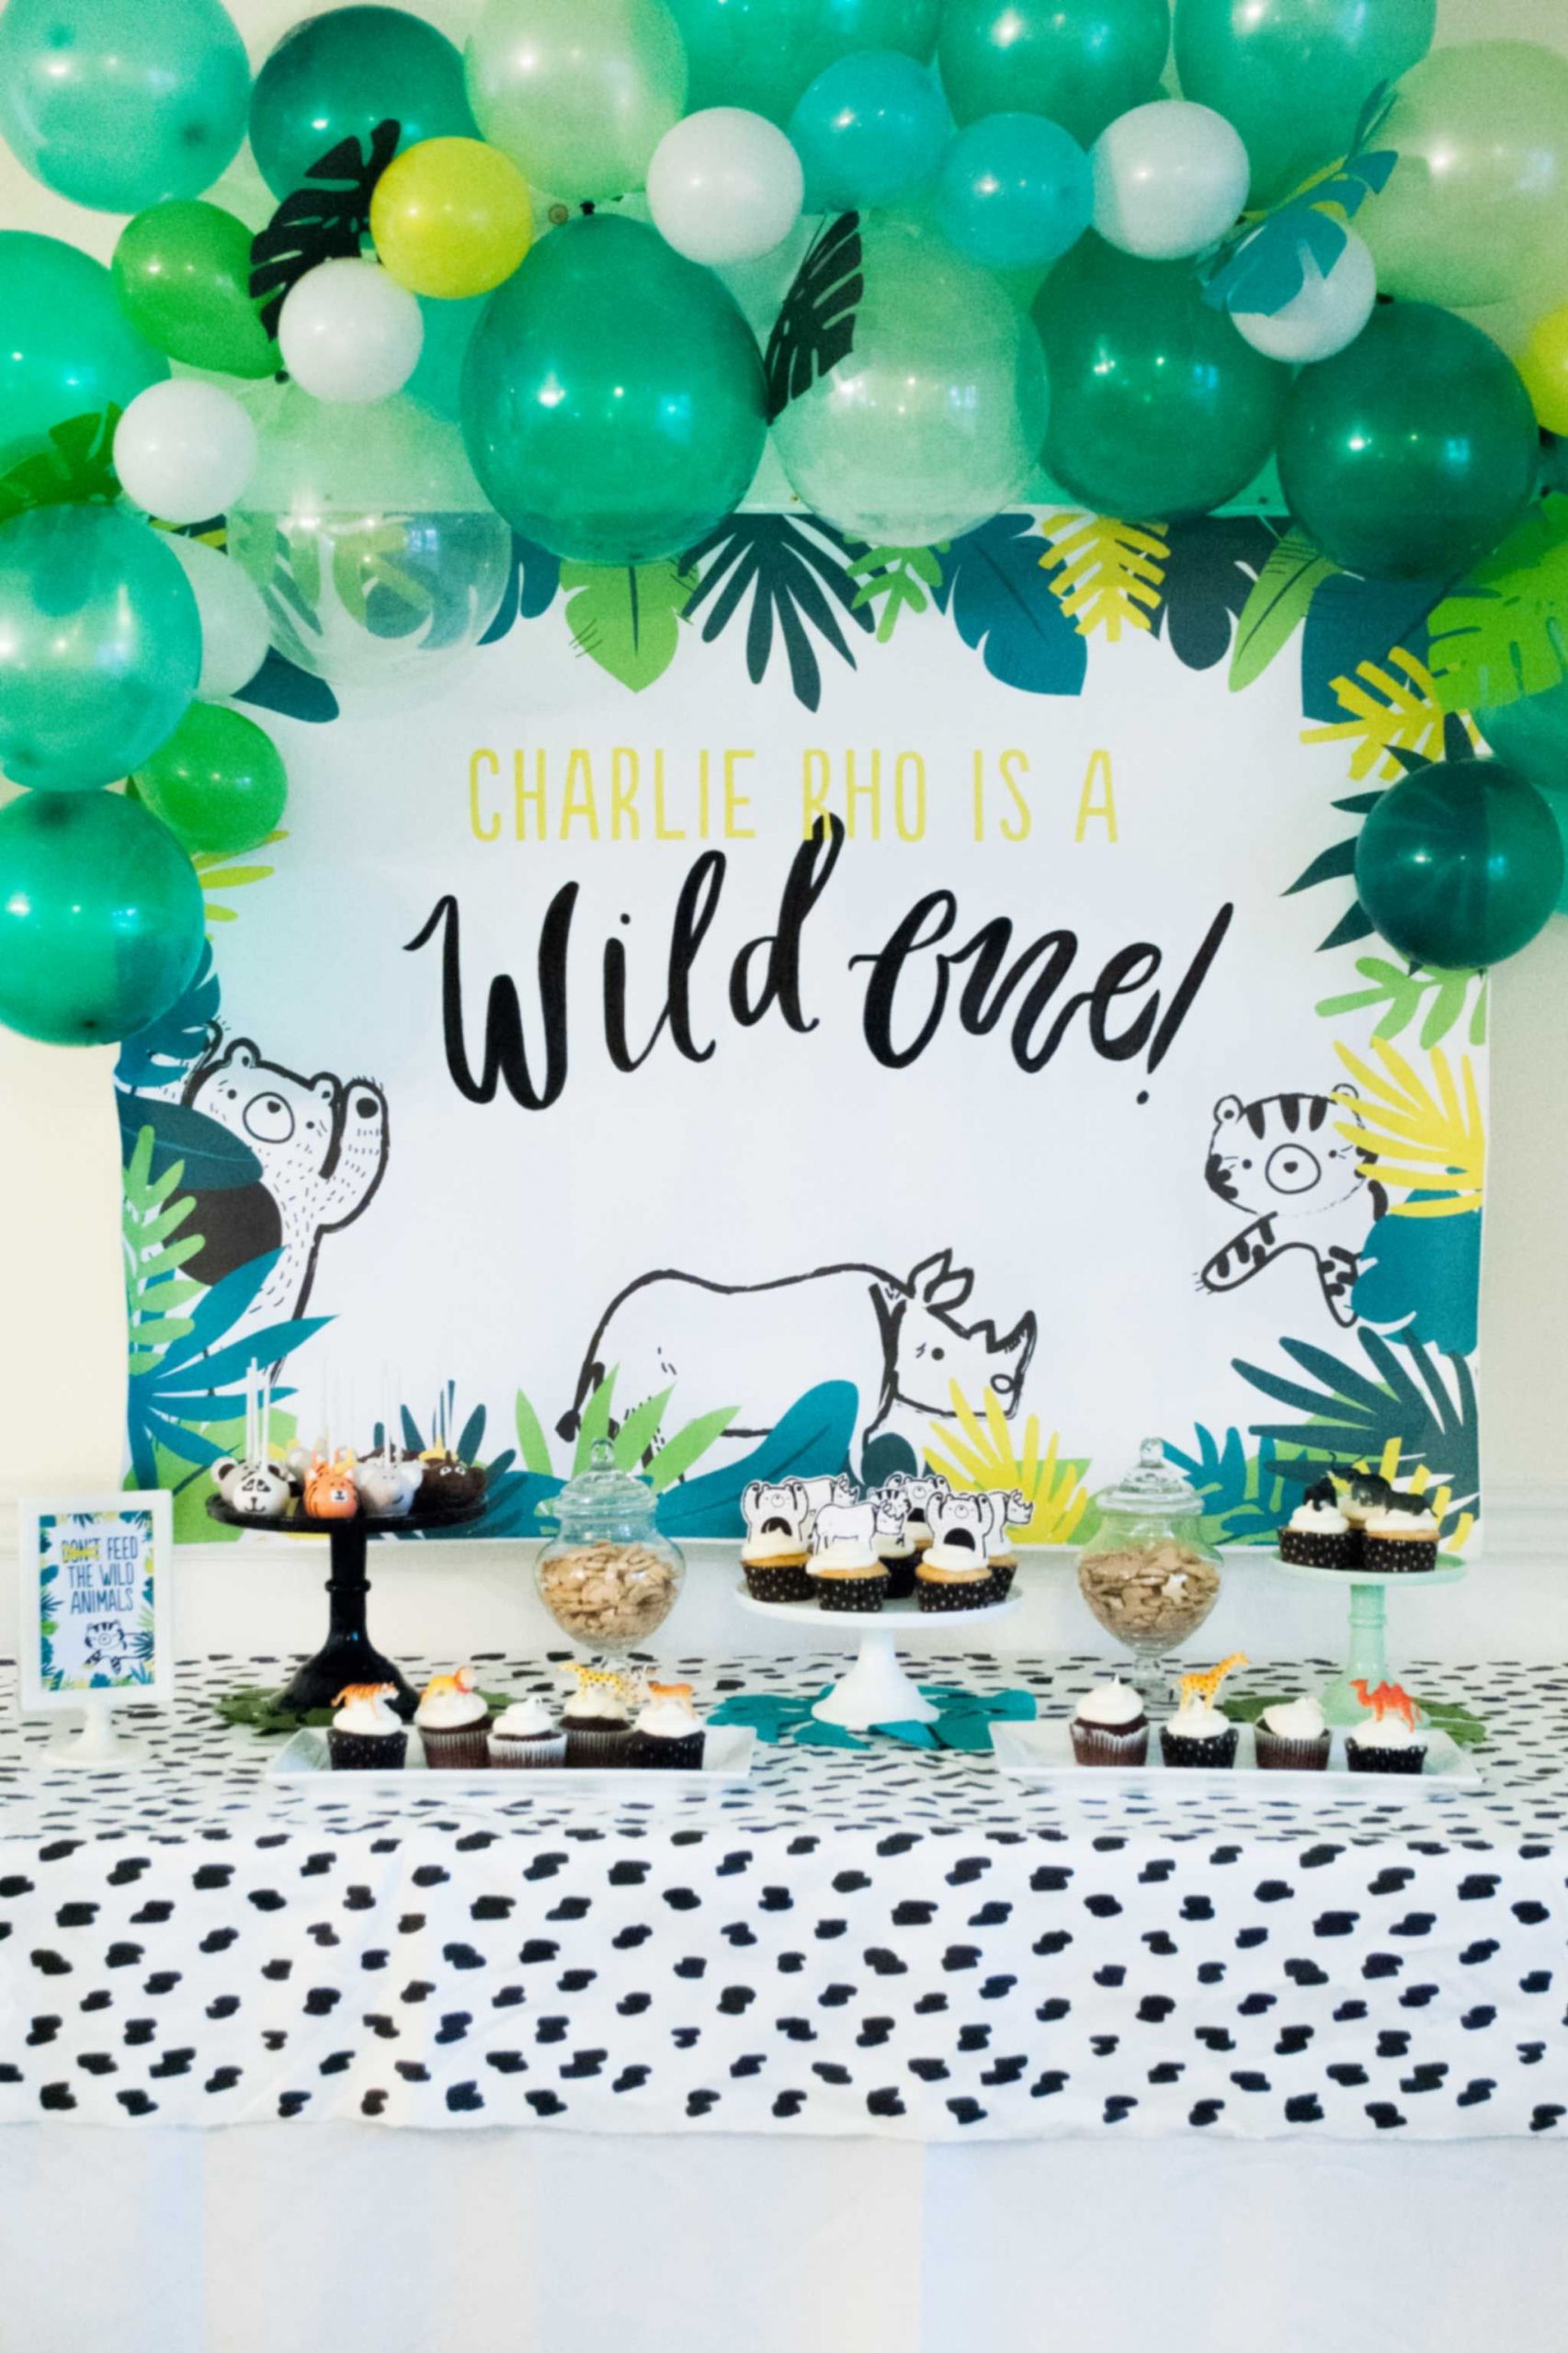 1St Birthday Party Decorations For Baby Boy
 Wild e Birthday Party